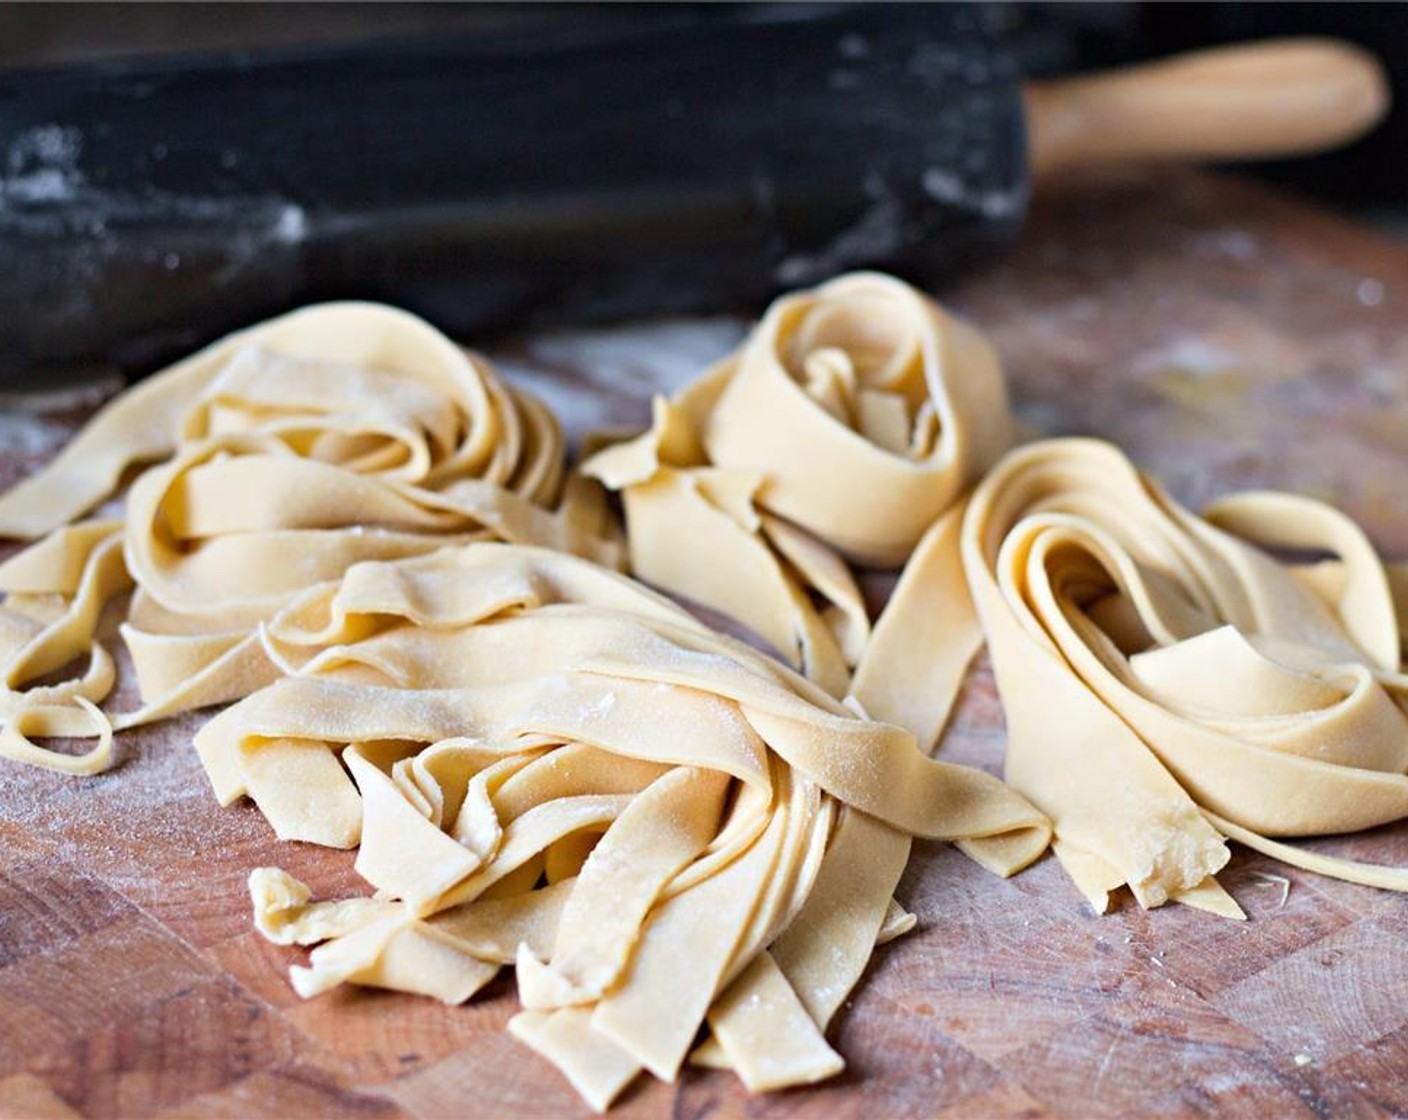 step 7 Boil in heavily salted water. Fresh pasta cooks in as little as 30 seconds if the noodles are thin. It's ready when it changes color and starts to float.